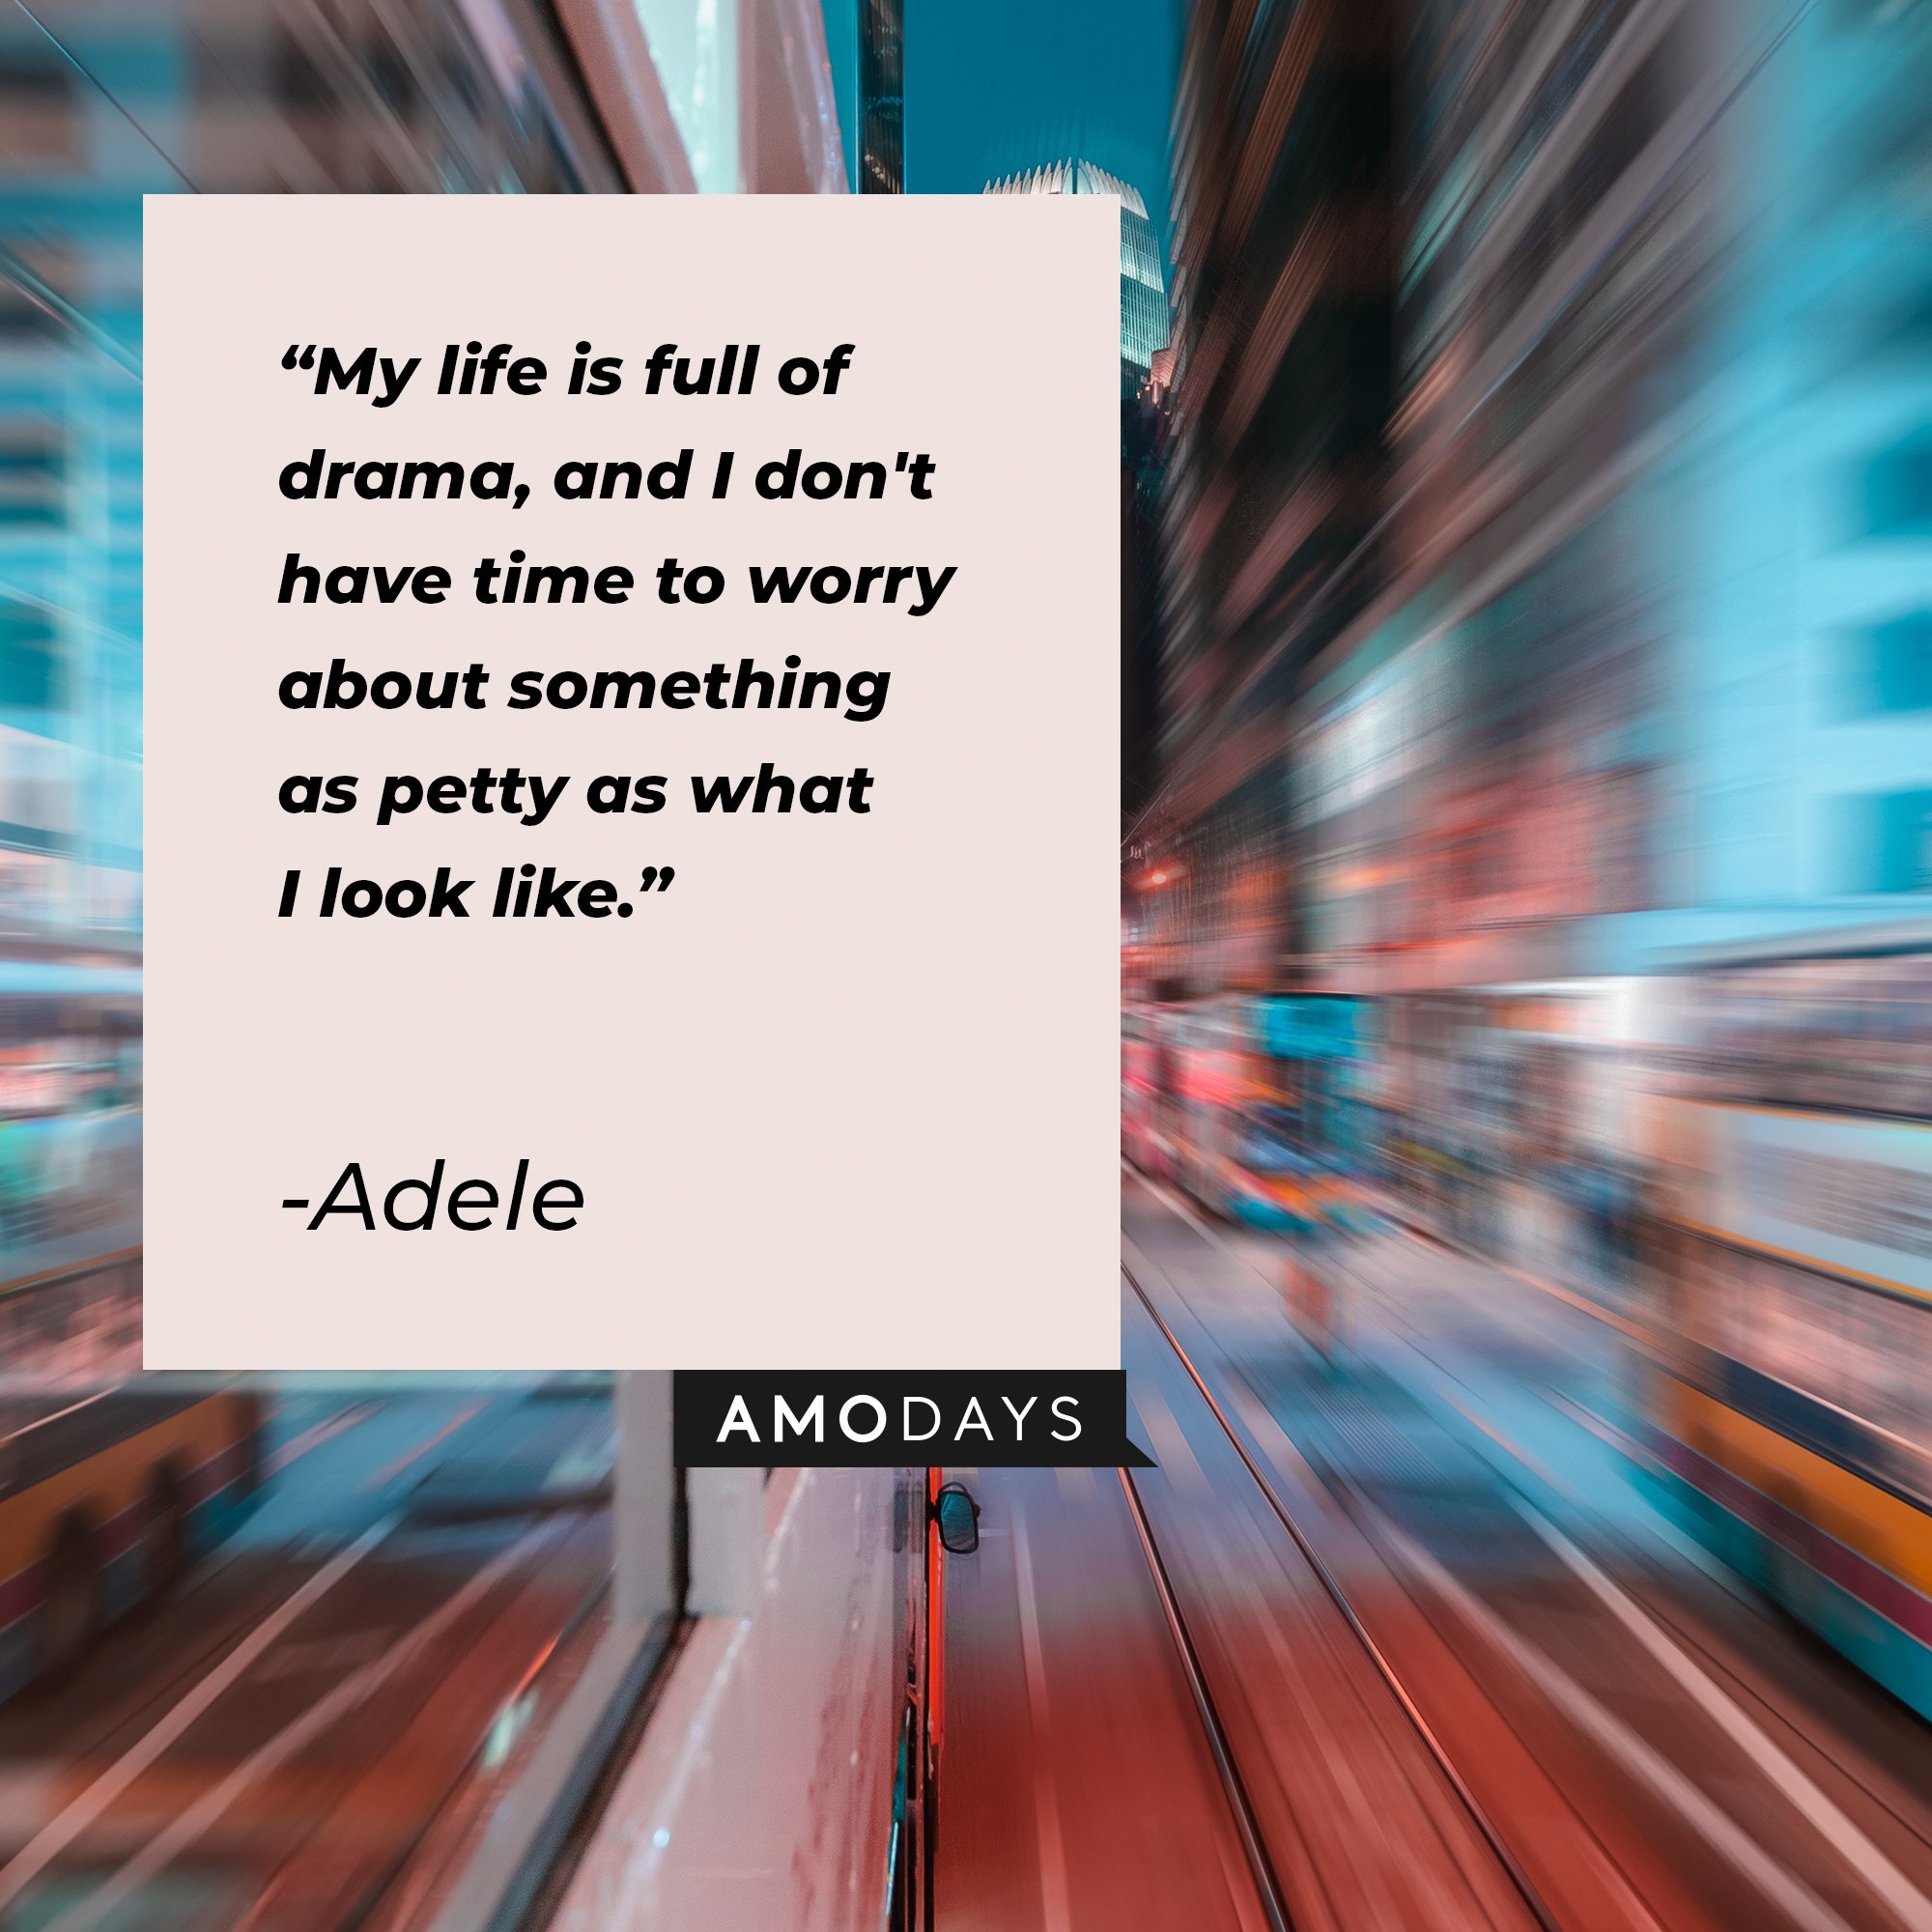 Adele's quote: "My life is full of drama, and I don't have time to worry about something as petty as what I look like." | Image: AmoDays